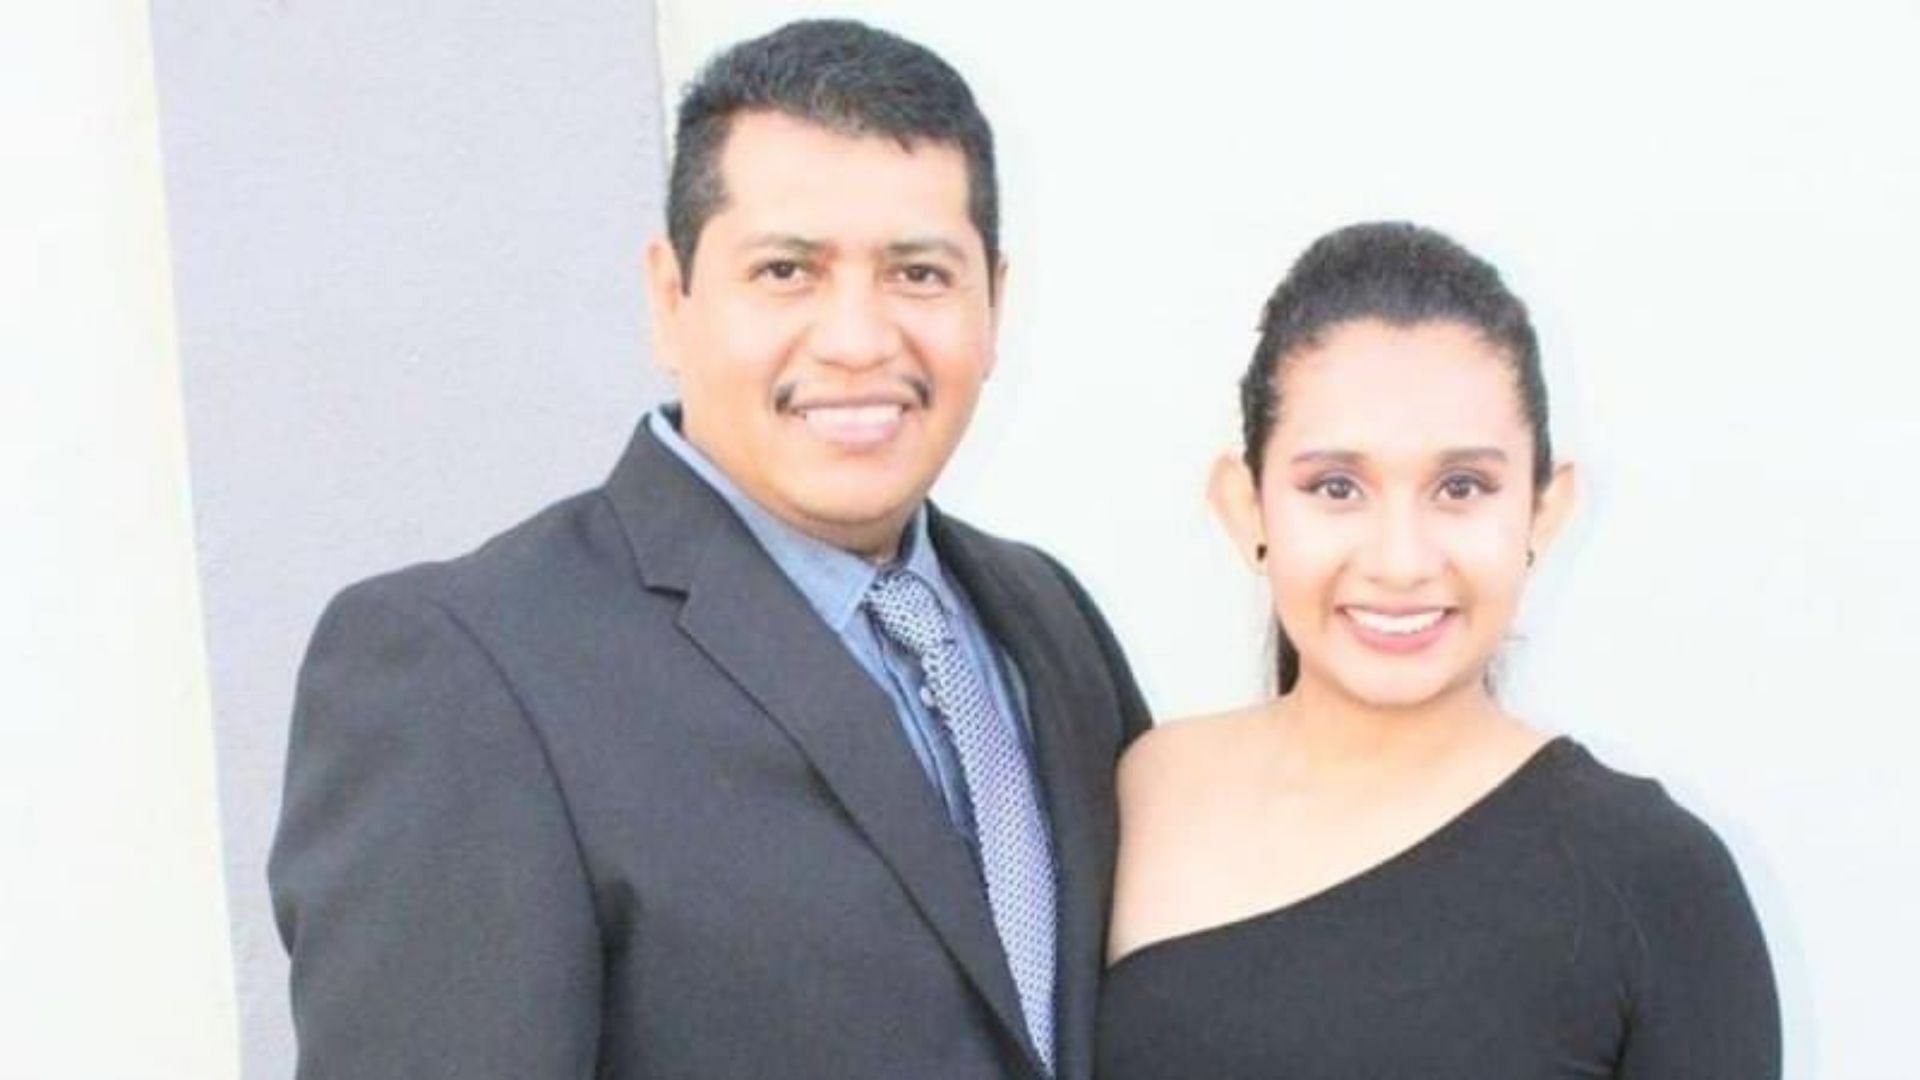 Mexican journalist Antonio de la Cruz and his daughter Cinthya were killed in front of their house (Image via ExpresoPress/Twitter)